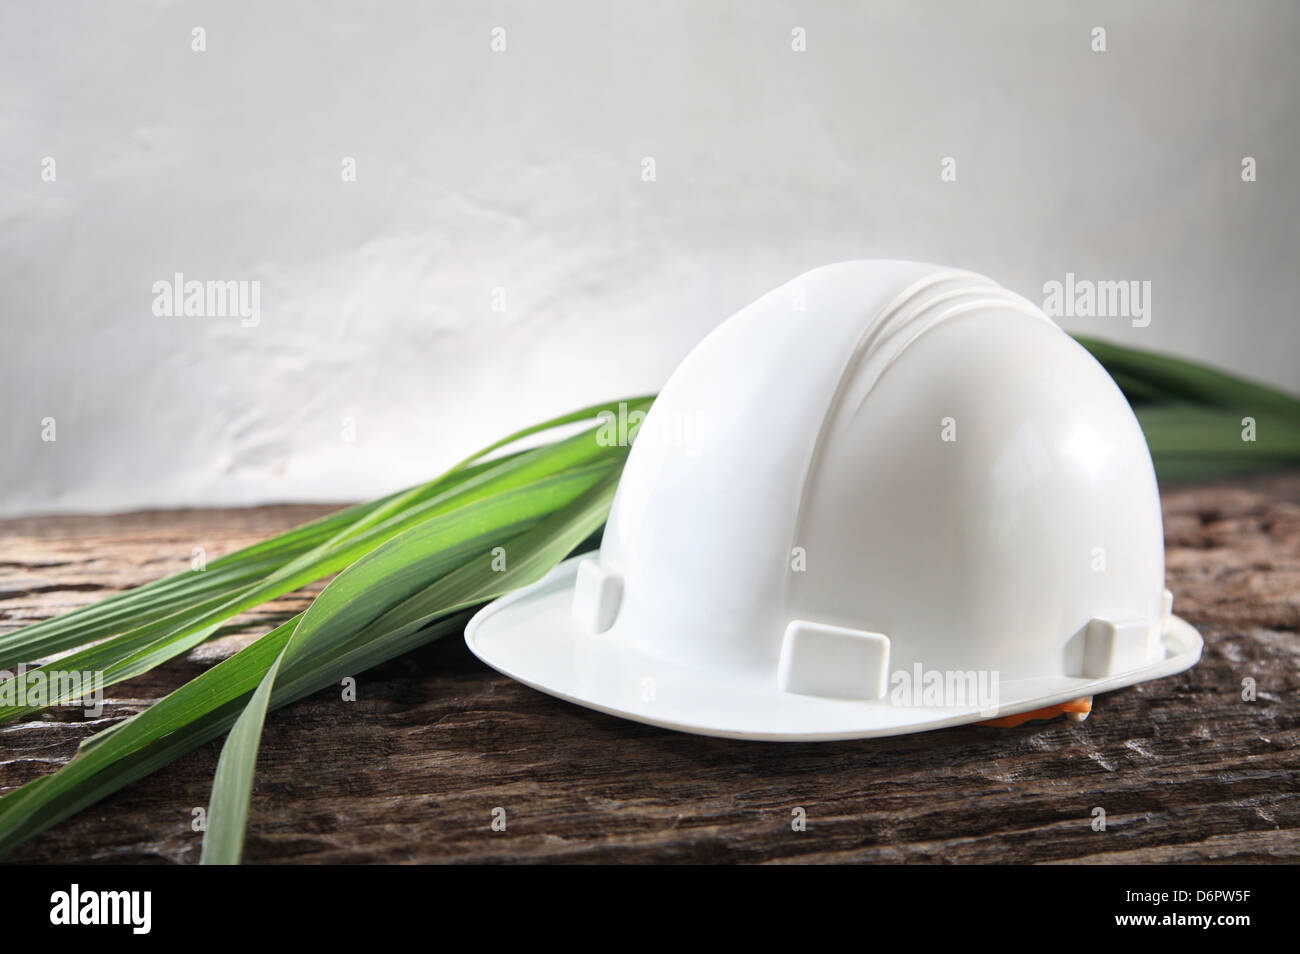 Concept shot of environmental friendly industry Stock Photo